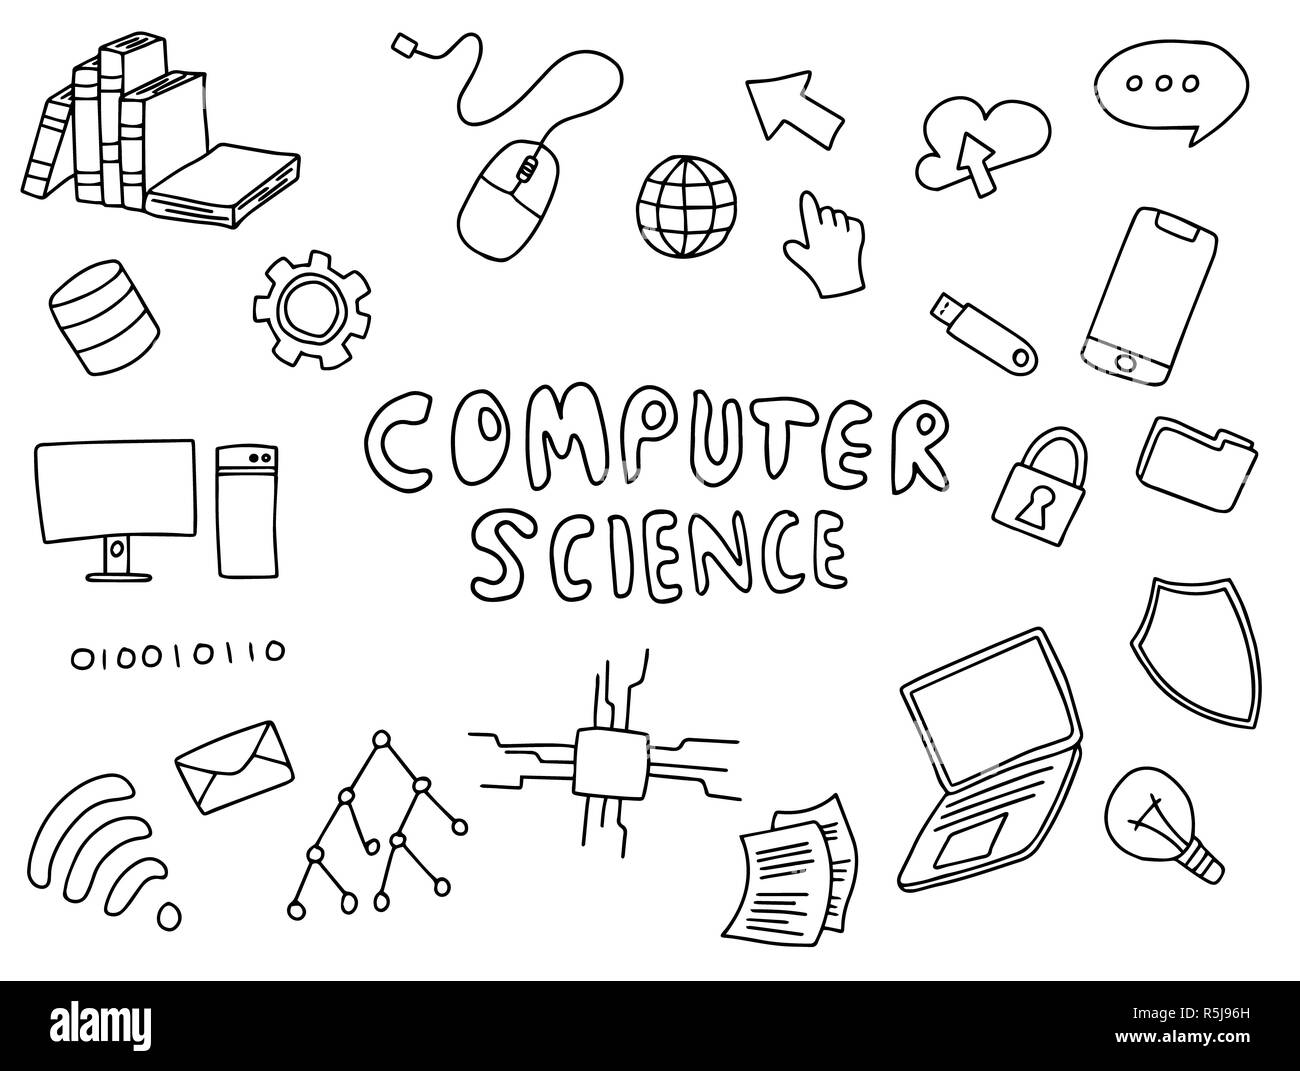 computer science engineering education doodle art with black and white color outline vector illustration Stock Photo